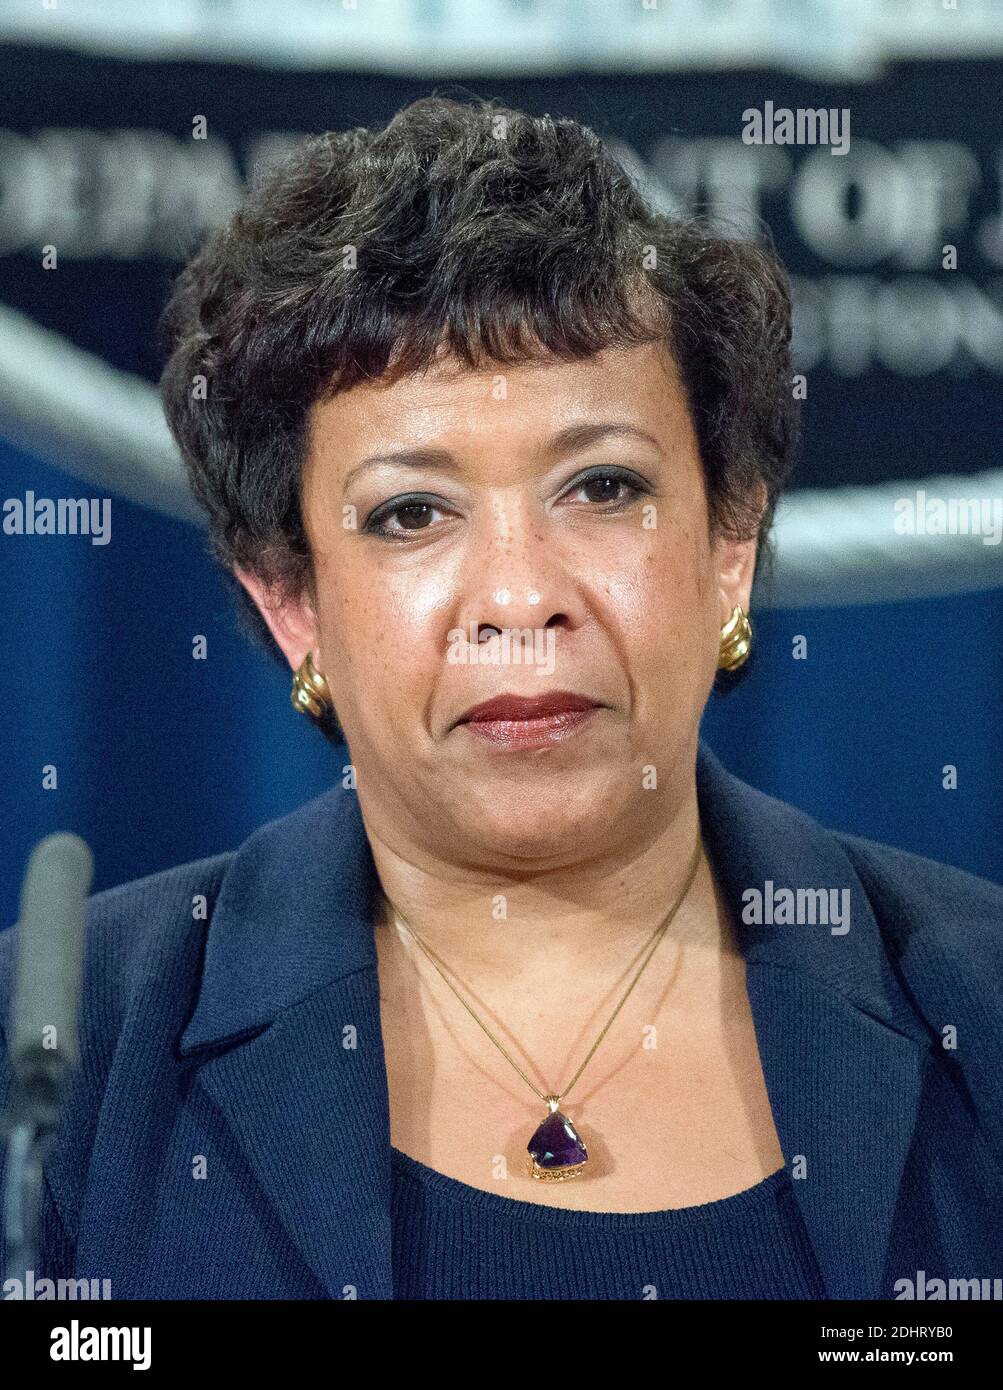 United States Attorney General Loretta E. Lynch makes opening remarks during a press conference with US Attorney Preet Bharara of the Southern District of New York at the Department of Justice in Washington, DC, USA, on Thursday, March 24, 2016. They announced criminal charges against seven individuals working on behalf of the Iranian government for conducting cyber attacks against the US financial sector and the Bowman Dam in Rye, NY. Photo by Ron Sachs/CNP/ABACAPRESS.COM Stock Photo